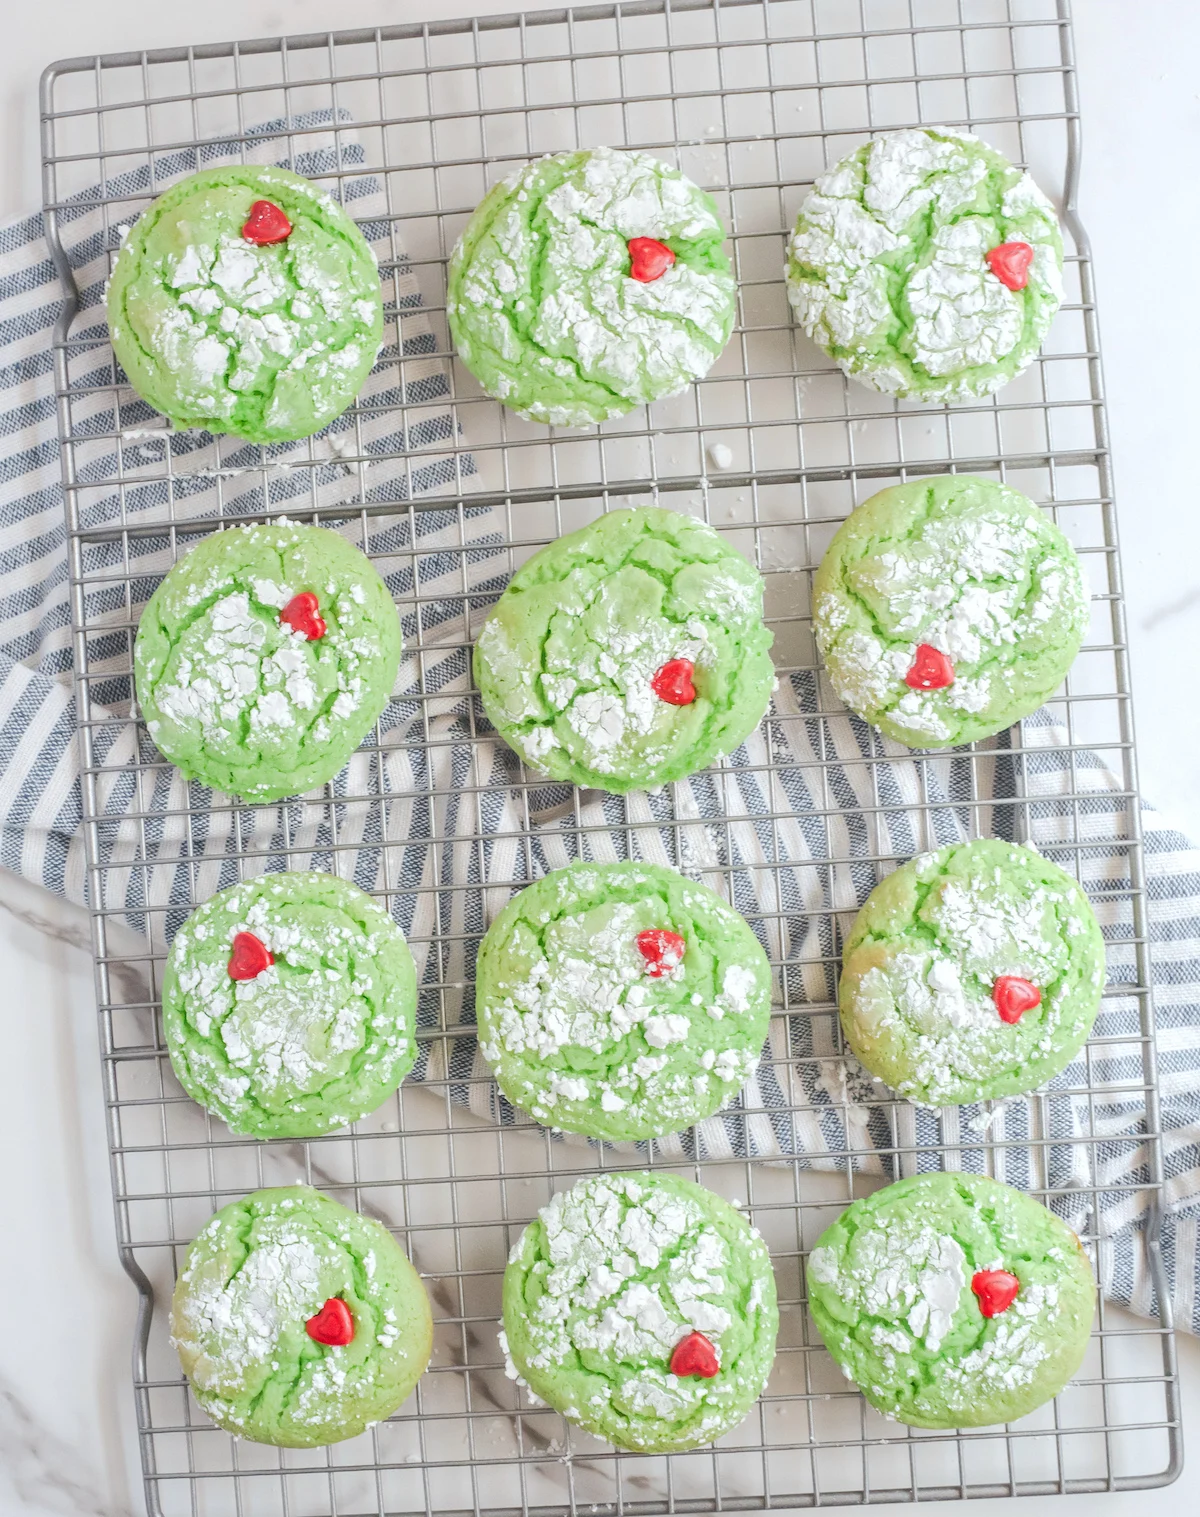 Heart shapes pressed into the green cake mix cookies